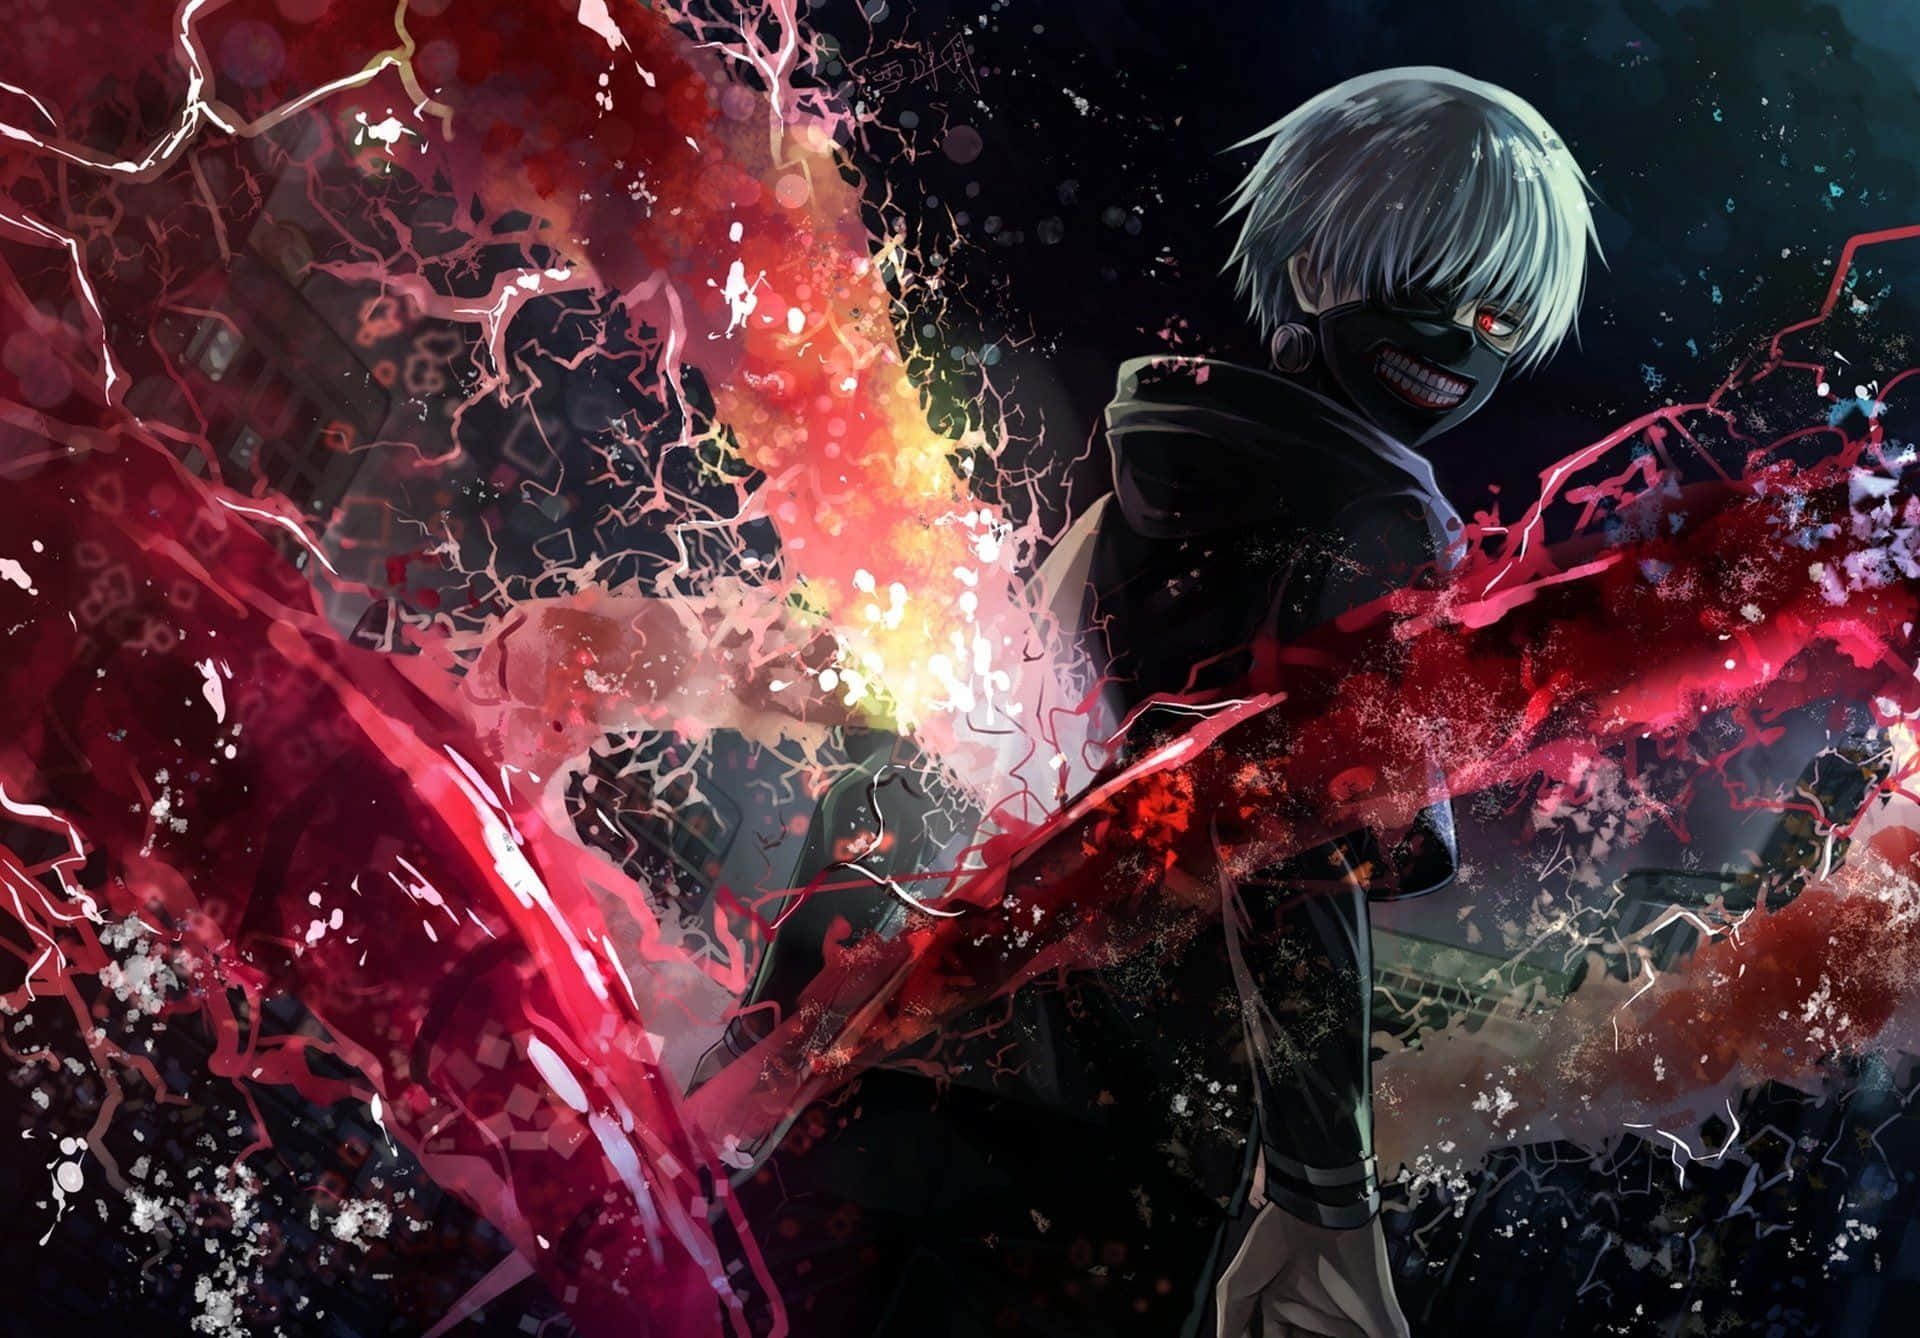 Hauntingly Beautiful Tokyo Ghoul Concept Art